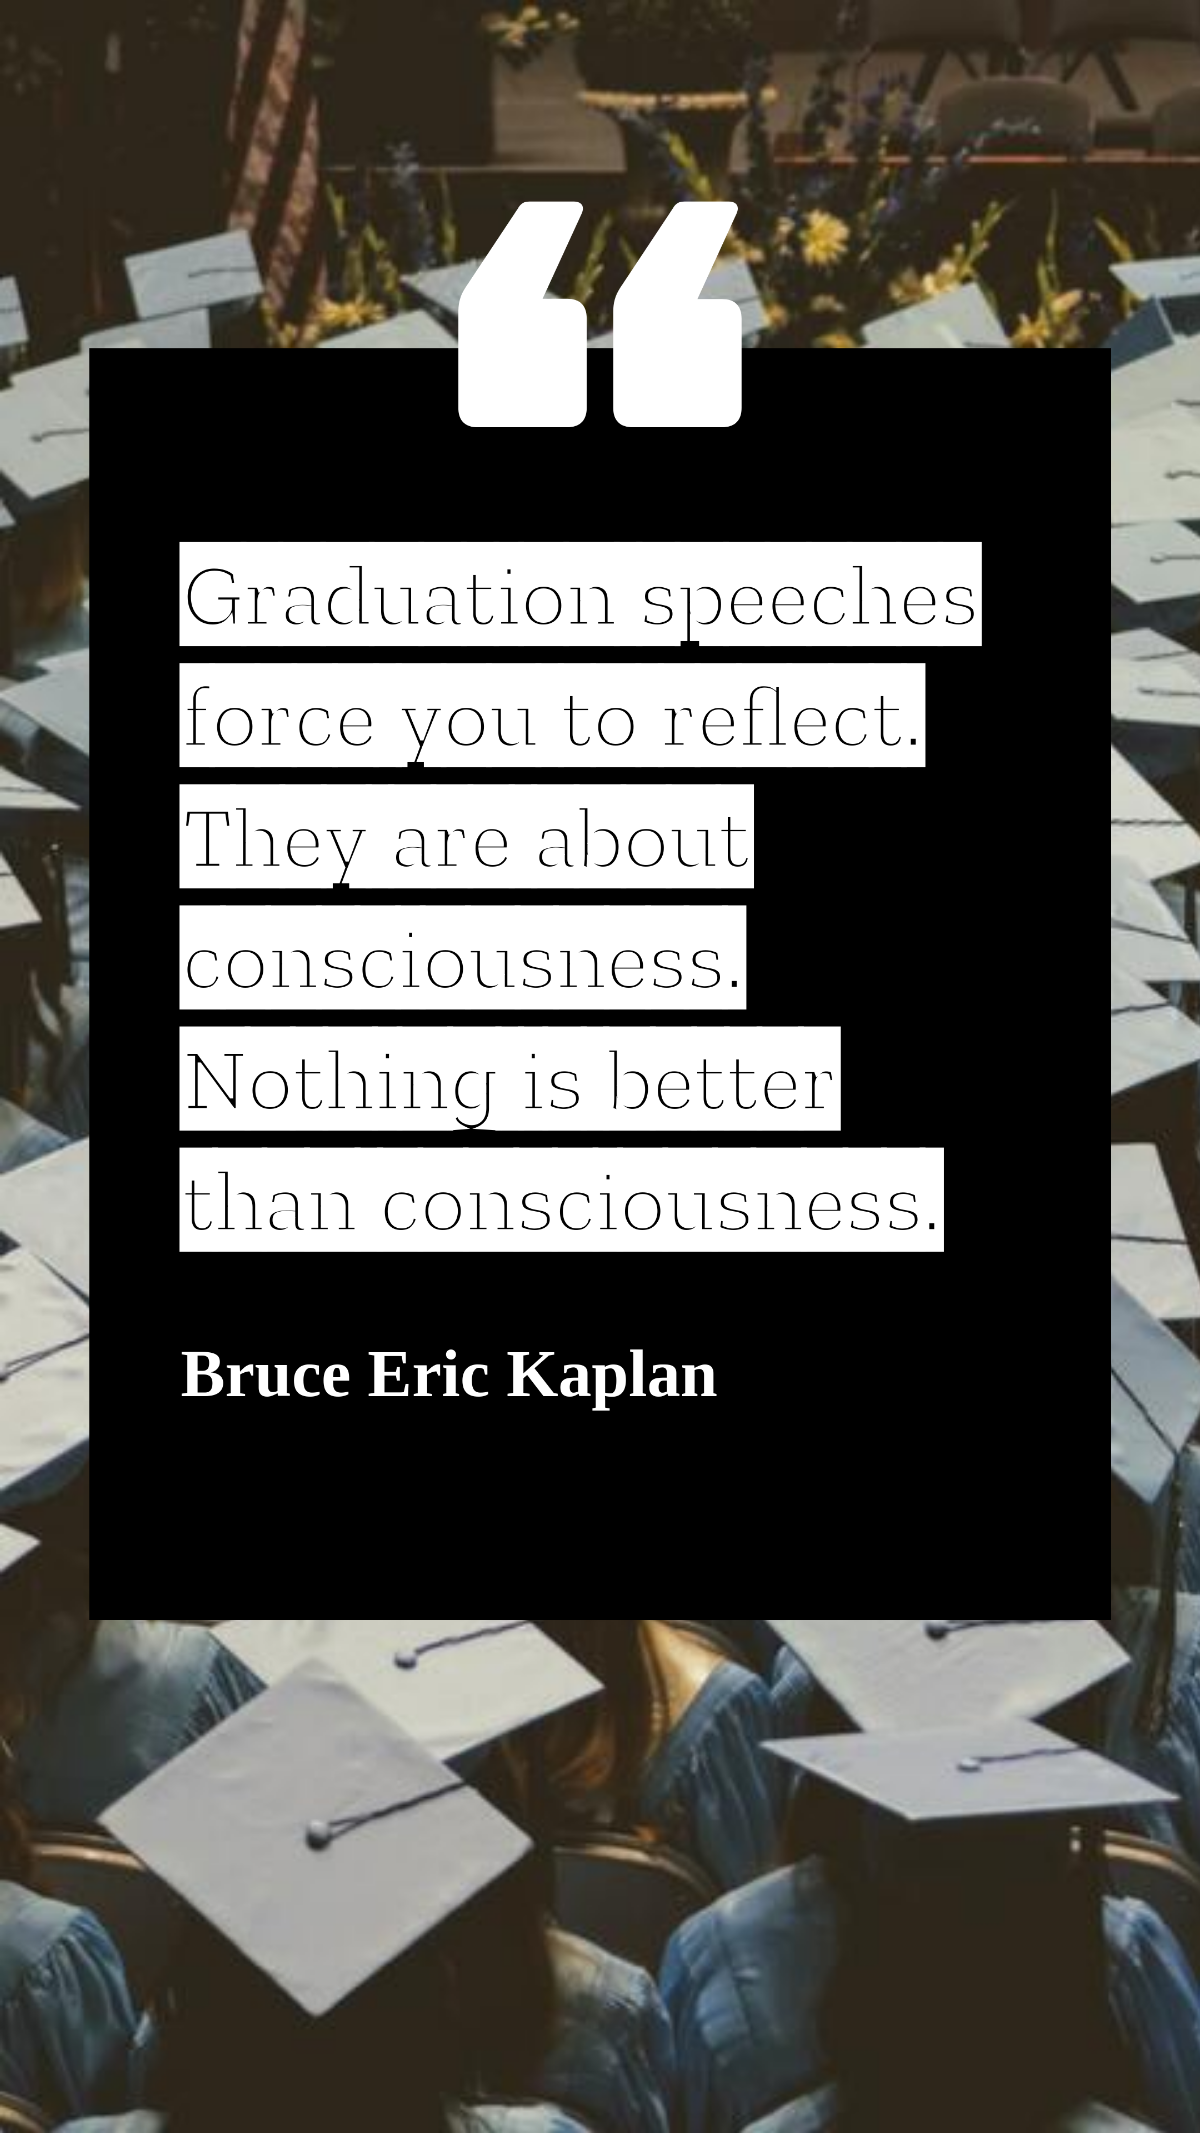 Free Bruce Eric Kaplan - Graduation speeches force you to reflect. They are about consciousness. Nothing is better than consciousness. Template